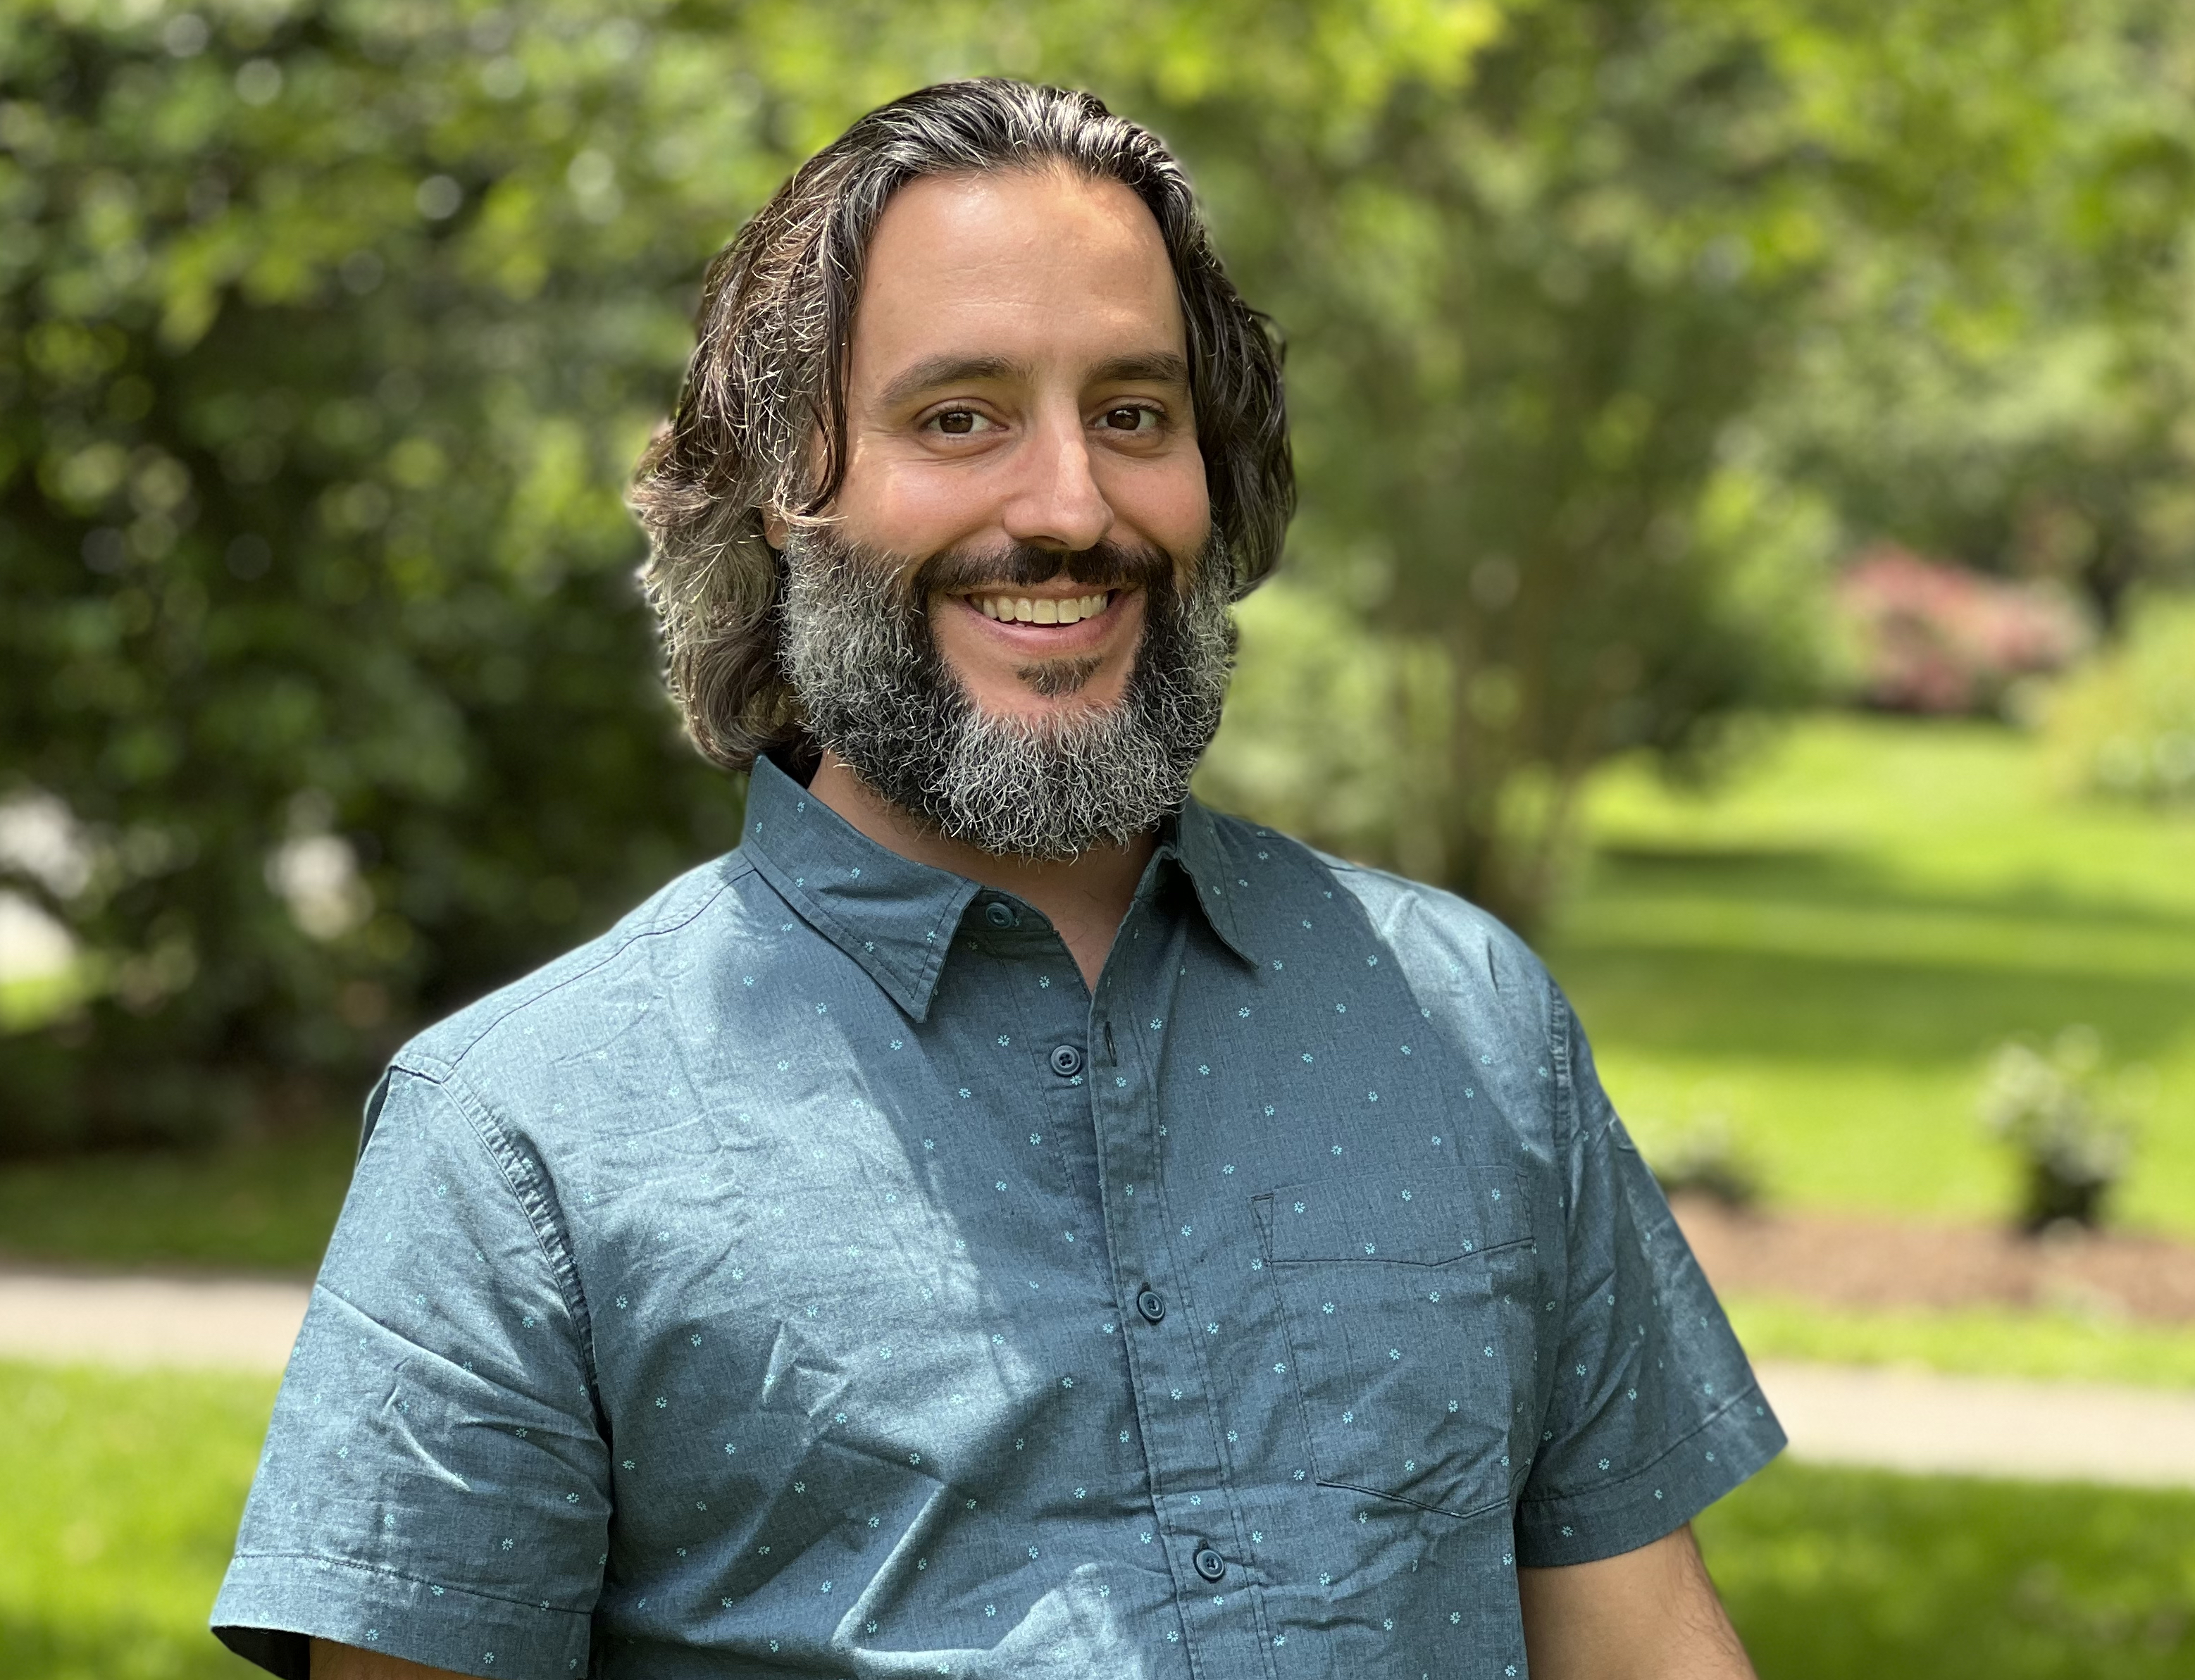 Joe DePasquale is a senior data image developer in the Office of Public Outreach at the Space Telescope Science Institute in Baltimore, Maryland.